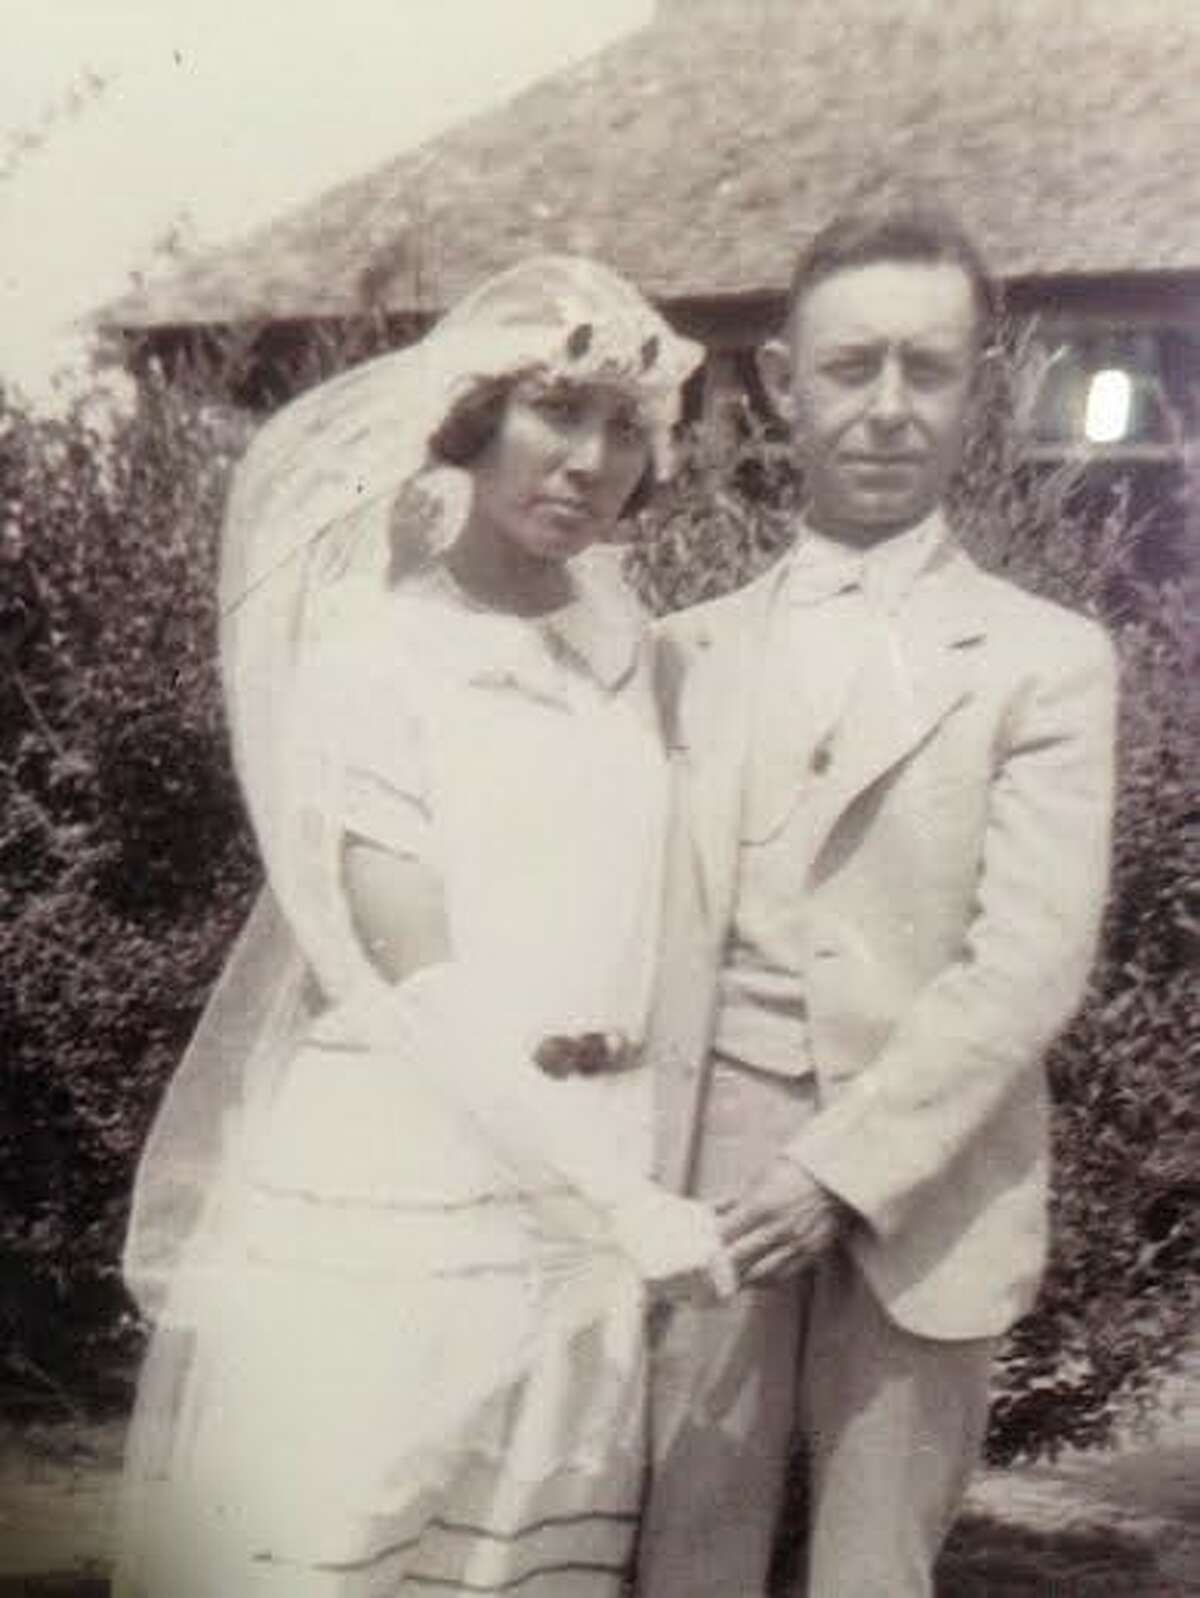 Lola Perot and her husband, John Donnelly, on their wedding day in 1925.